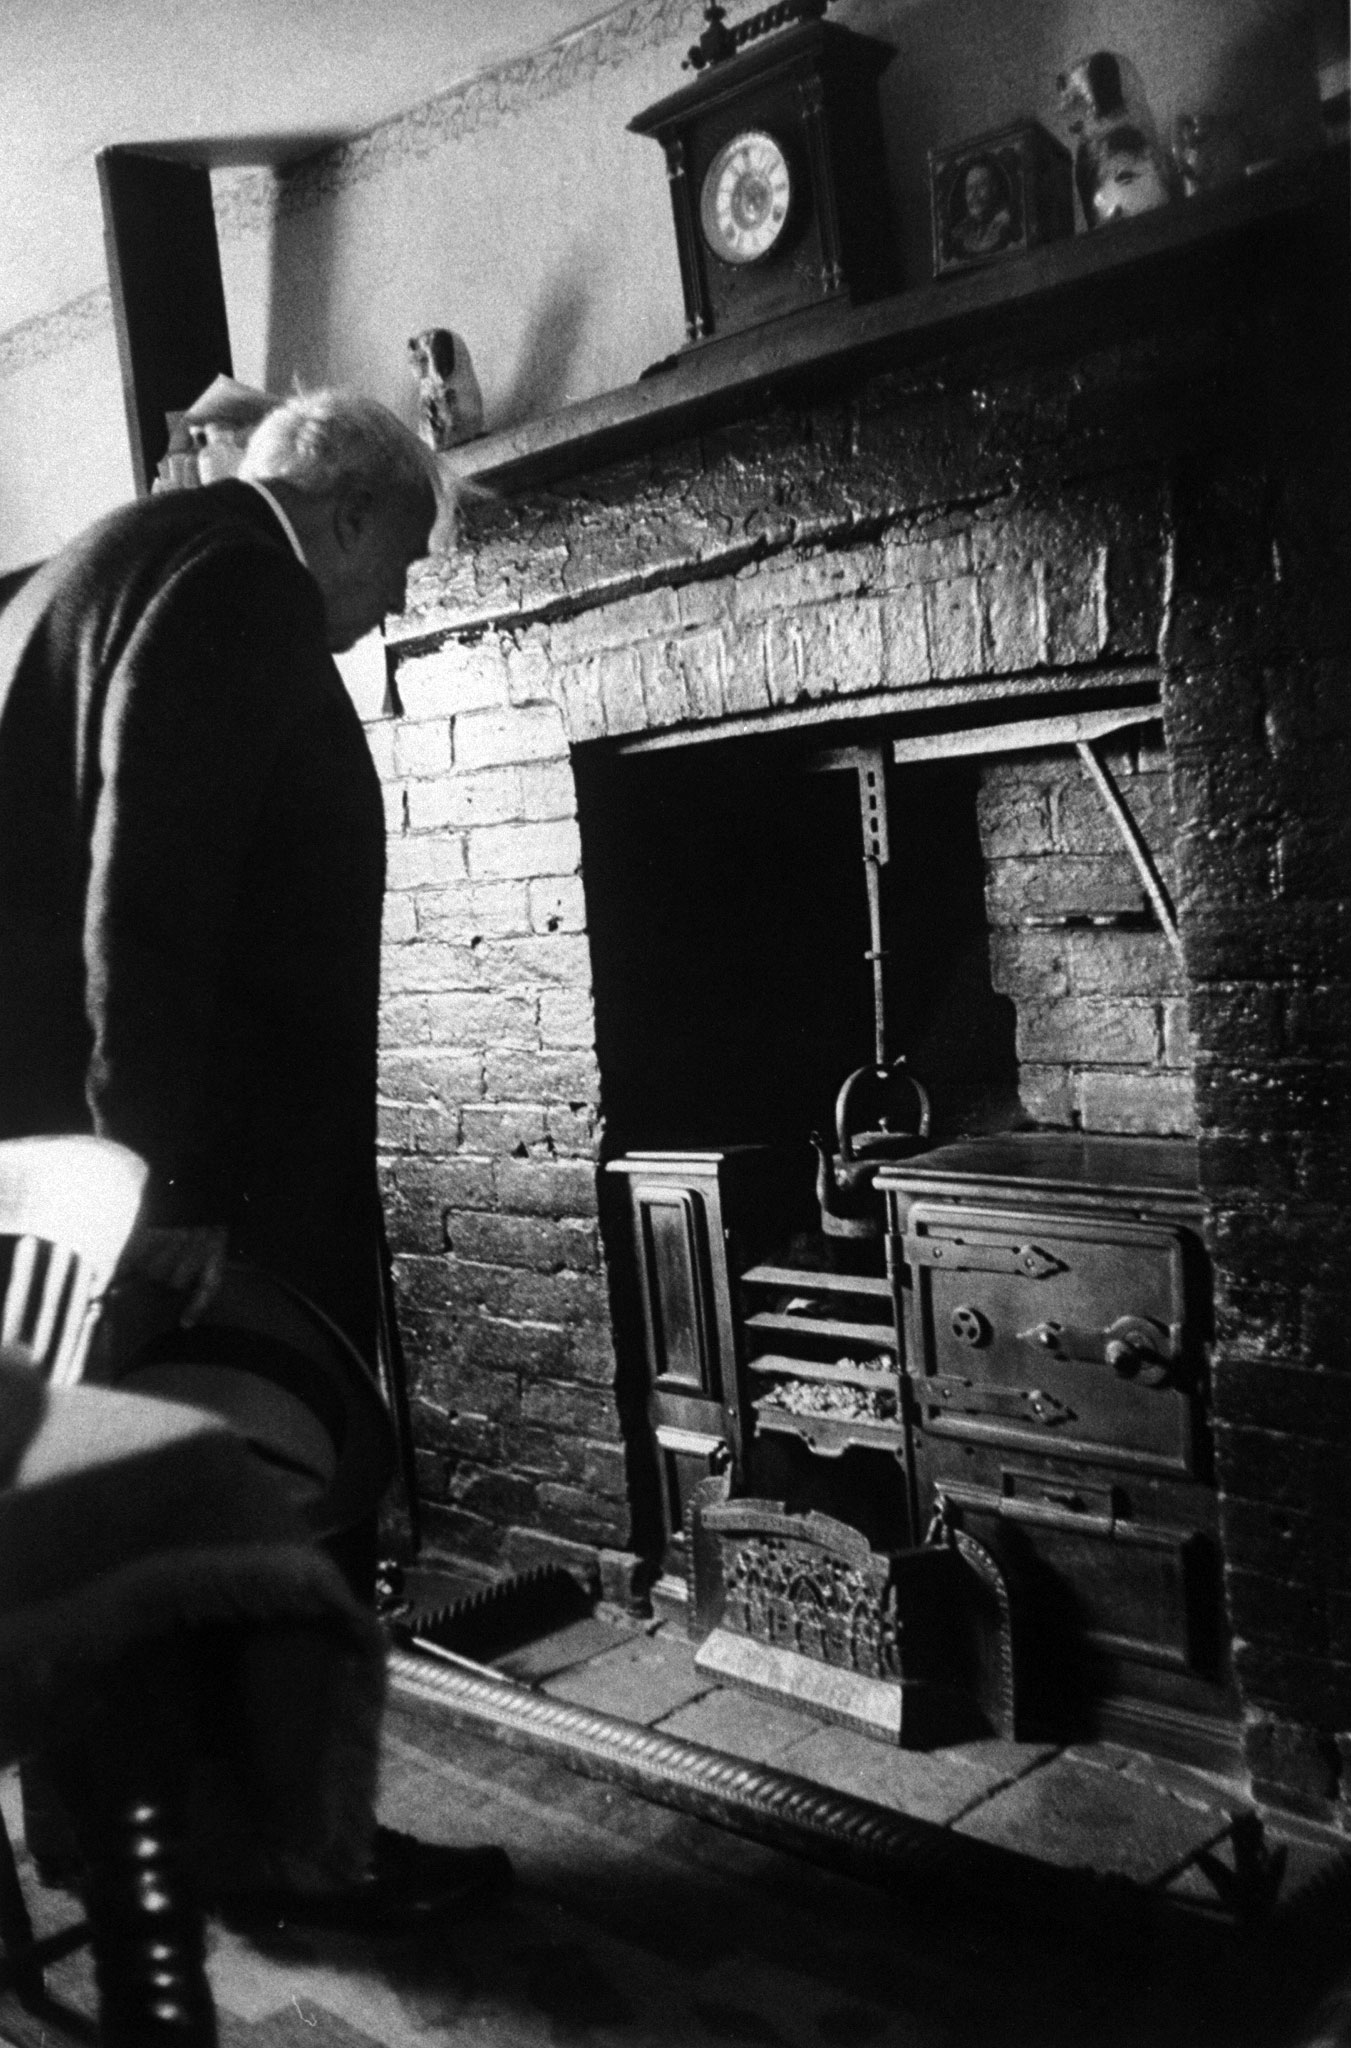 Frost, who once wrote, 'I never heard of a house that throve . . . where the chimney started above the stove,' examines stove of his old kitchen at Little Iddens, Gloucestershire